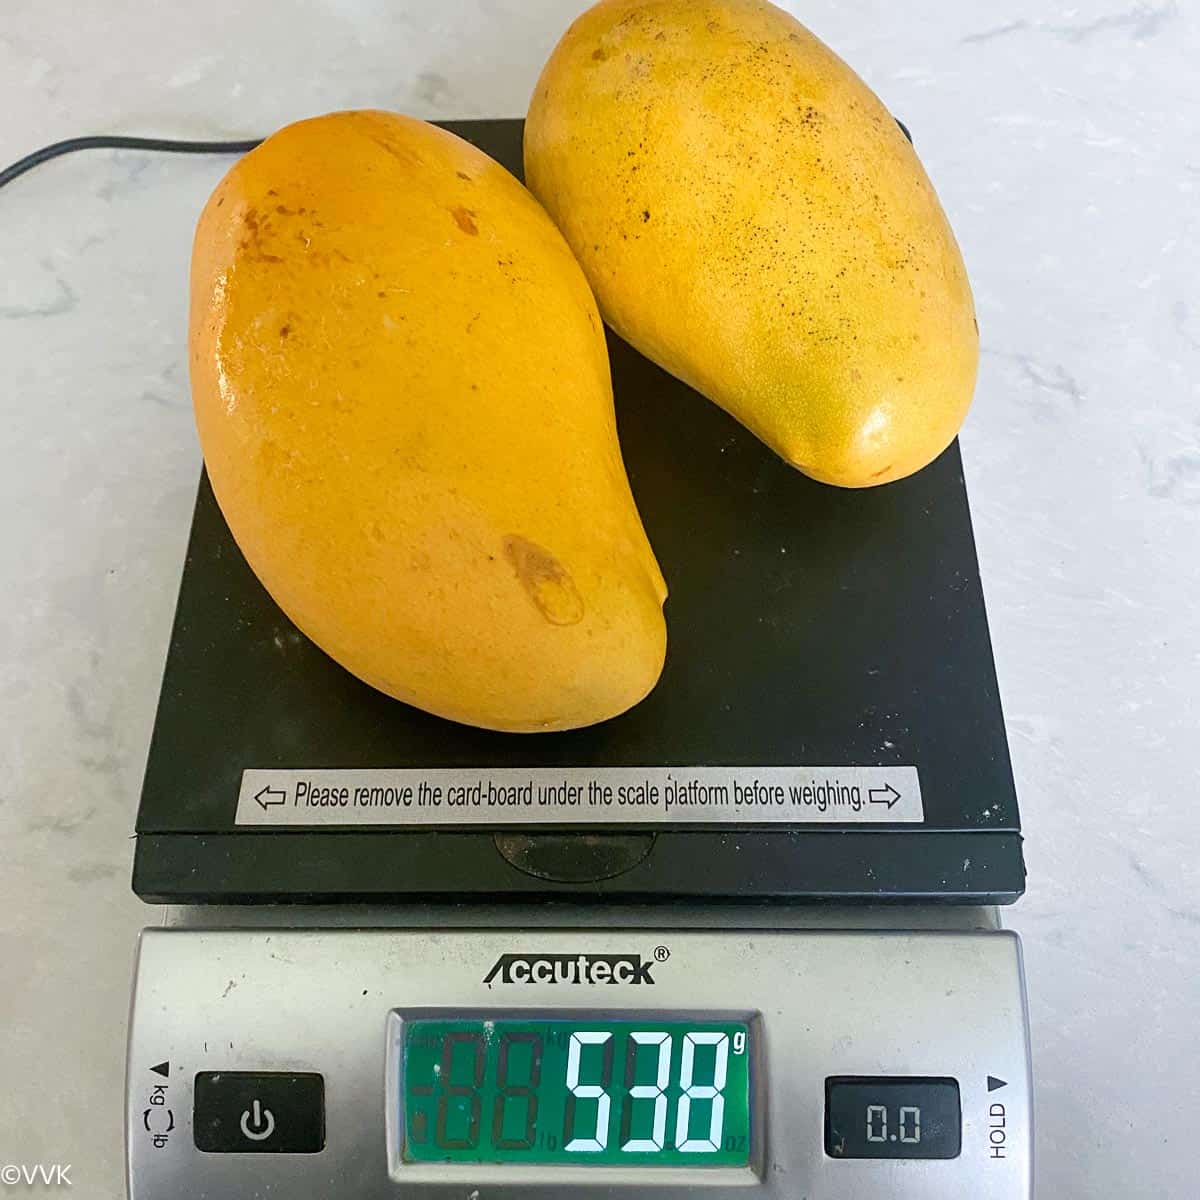 mango placed on a weighing scale